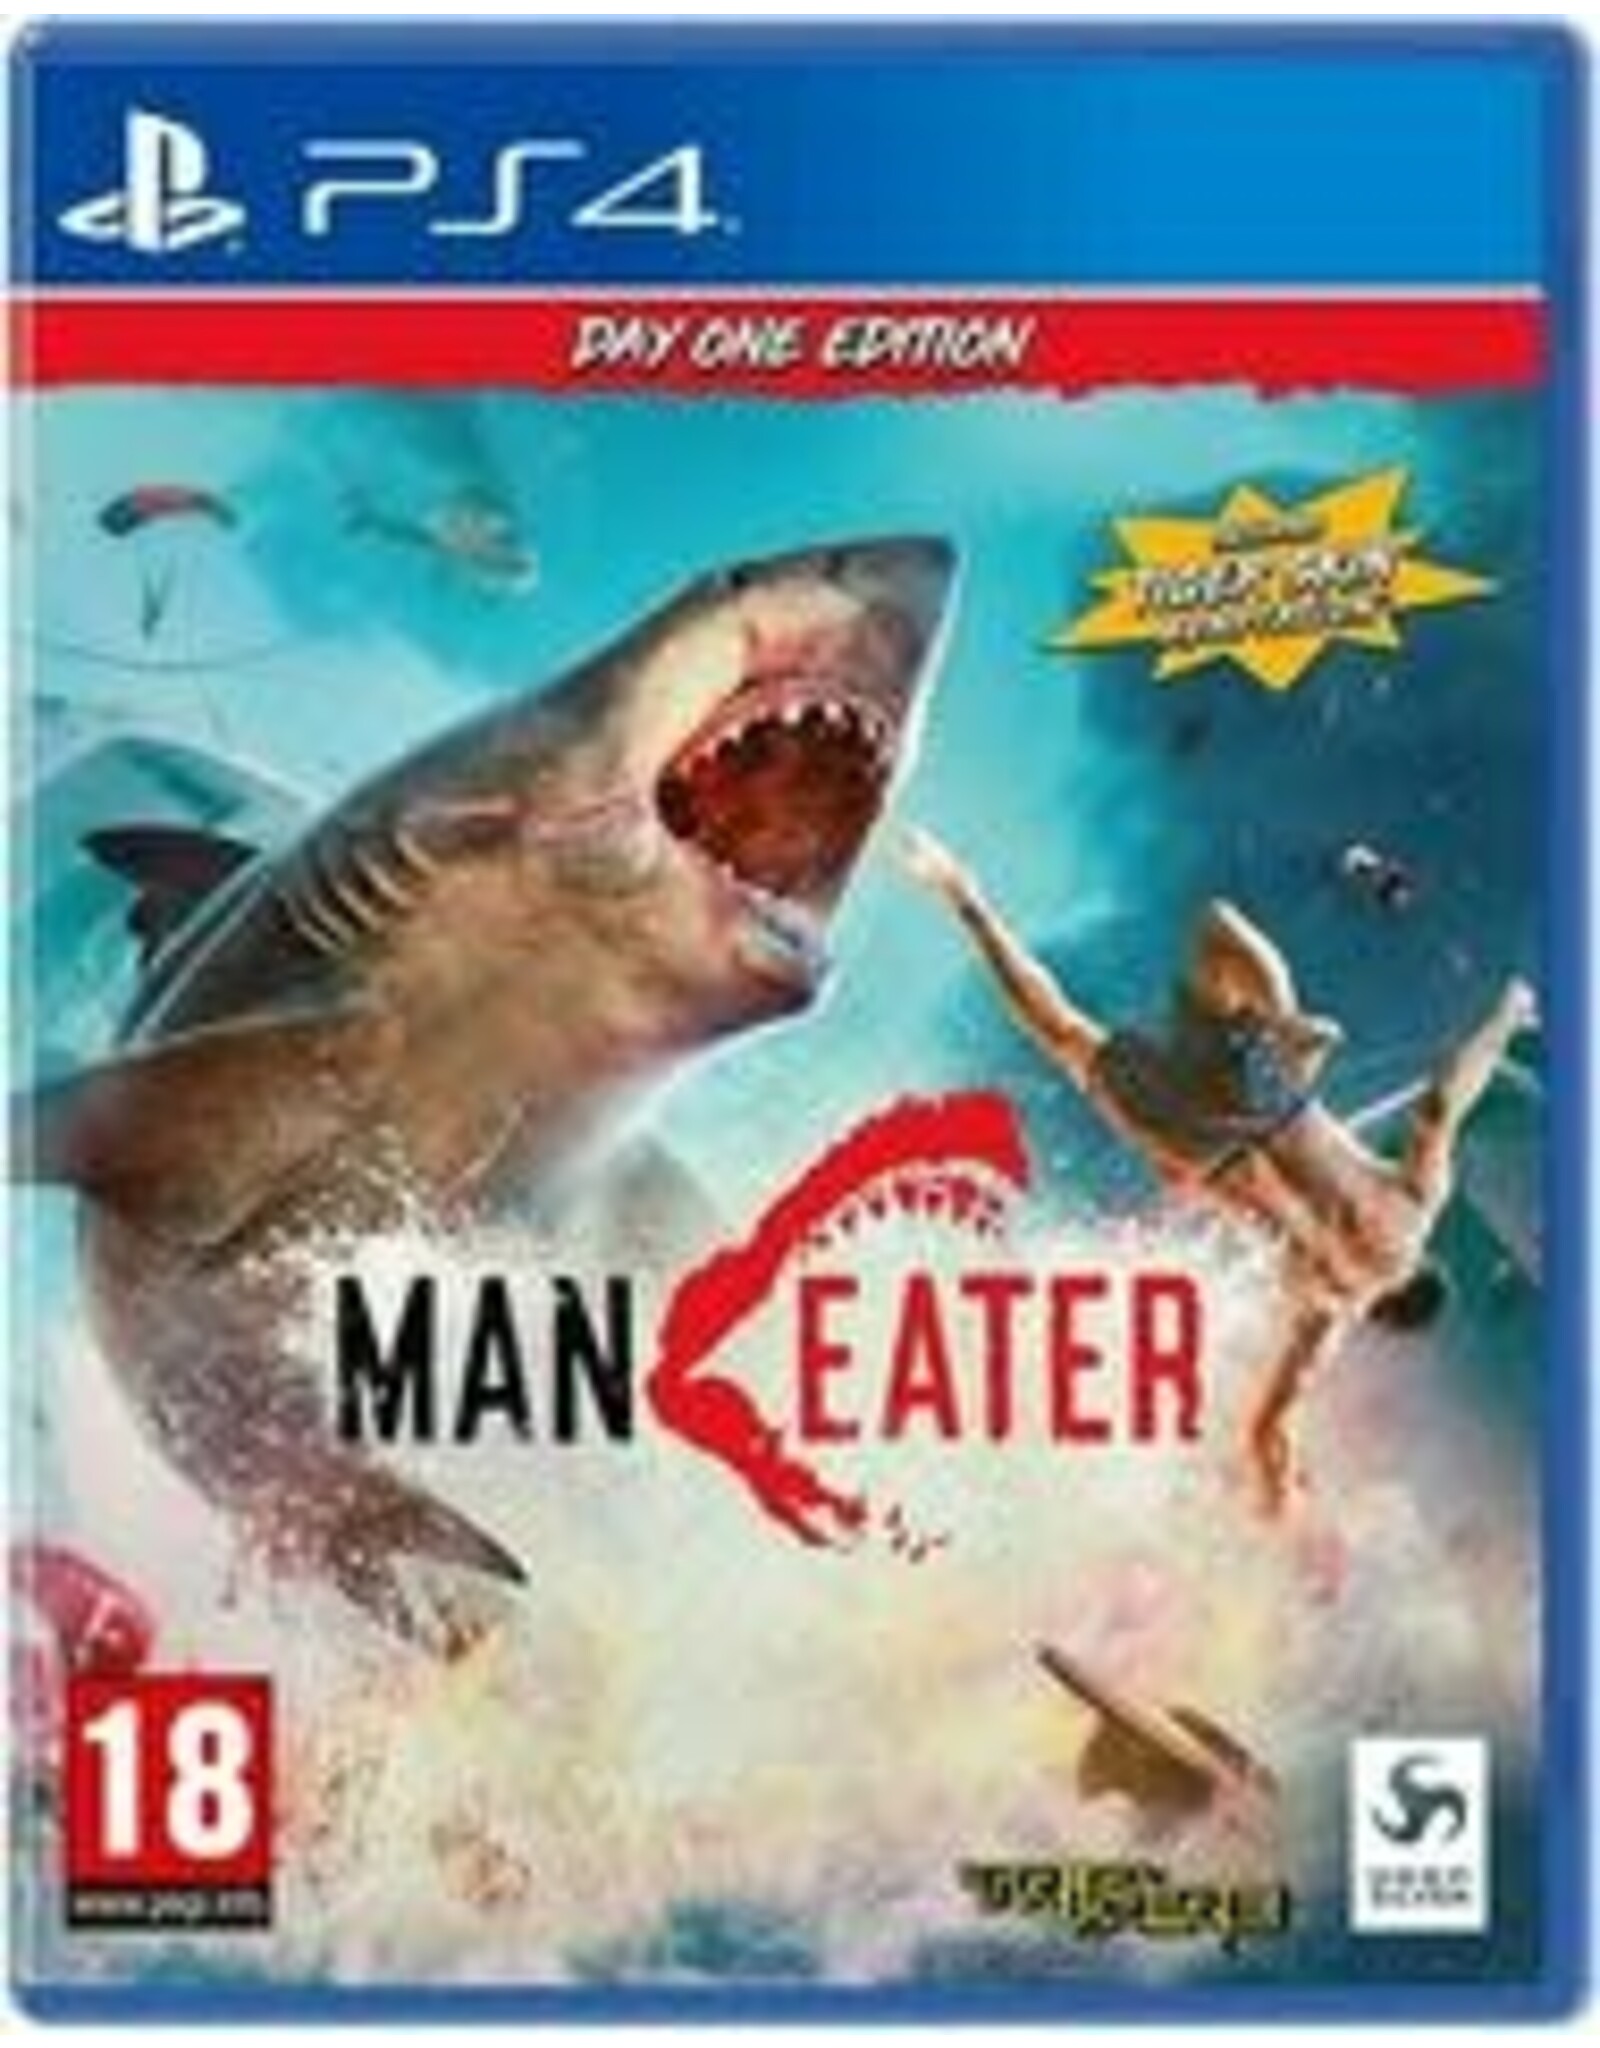 Playstation 4 Maneater Day One Edition (Brand New, PAL Import)